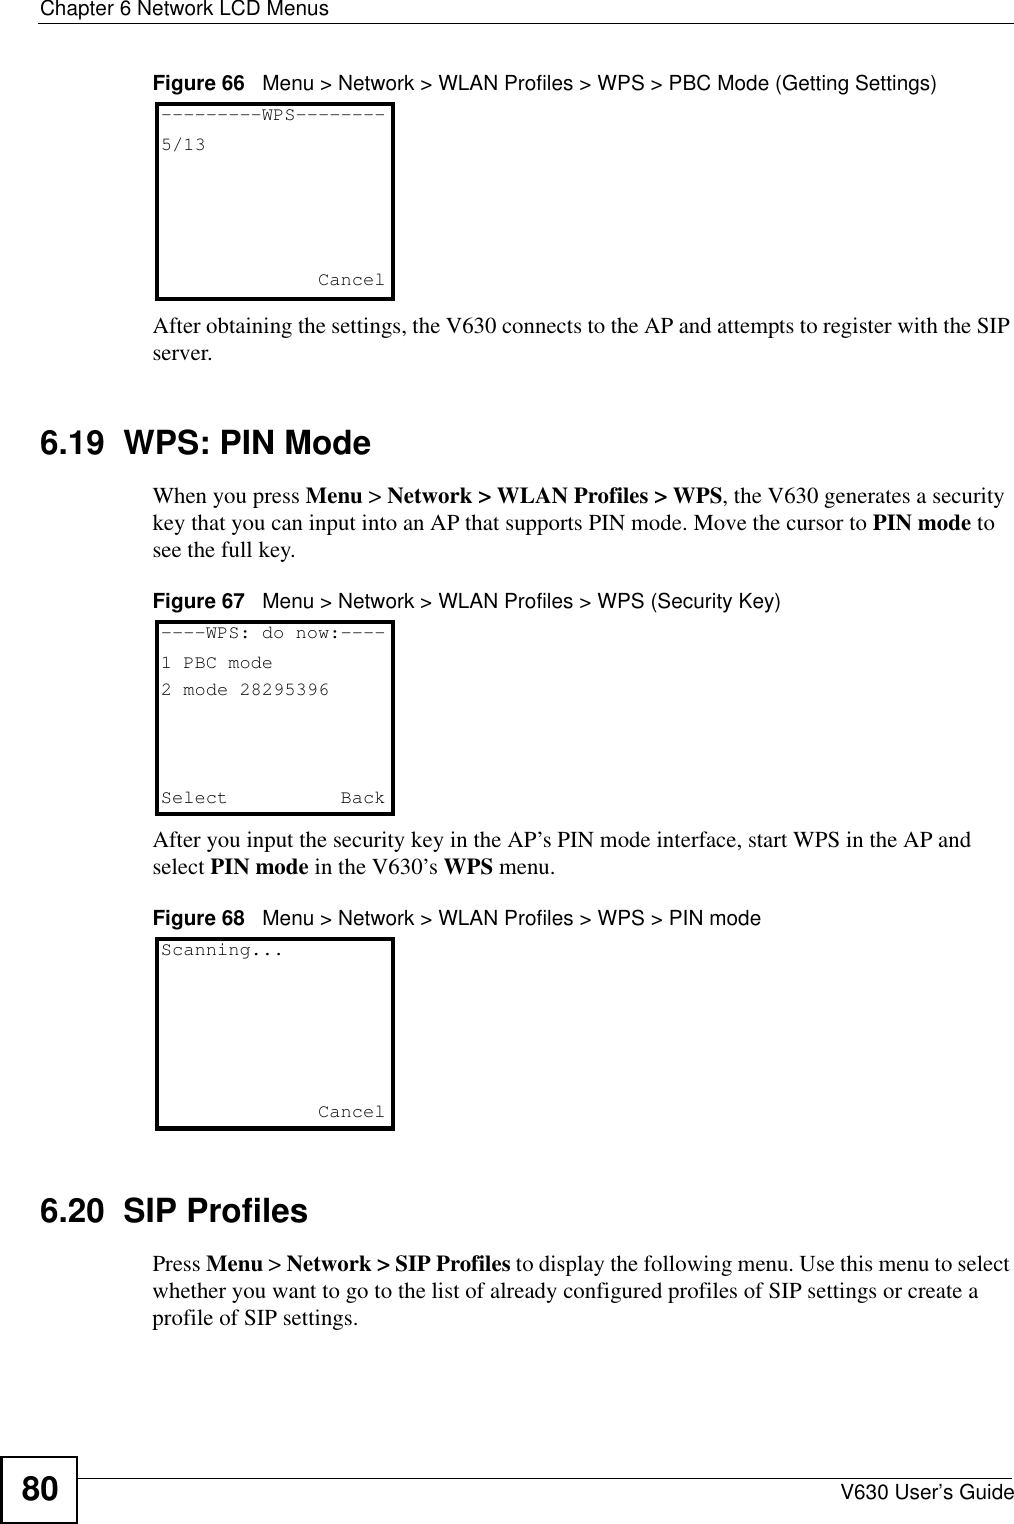 Chapter 6 Network LCD MenusV630 User’s Guide80Figure 66   Menu &gt; Network &gt; WLAN Profiles &gt; WPS &gt; PBC Mode (Getting Settings)After obtaining the settings, the V630 connects to the AP and attempts to register with the SIP server. 6.19  WPS: PIN ModeWhen you press Menu &gt; Network &gt; WLAN Profiles &gt; WPS, the V630 generates a security key that you can input into an AP that supports PIN mode. Move the cursor to PIN mode to see the full key.Figure 67   Menu &gt; Network &gt; WLAN Profiles &gt; WPS (Security Key)After you input the security key in the AP’s PIN mode interface, start WPS in the AP and select PIN mode in the V630’s WPS menu. Figure 68   Menu &gt; Network &gt; WLAN Profiles &gt; WPS &gt; PIN mode6.20  SIP ProfilesPress Menu &gt; Network &gt; SIP Profiles to display the following menu. Use this menu to select whether you want to go to the list of already configured profiles of SIP settings or create a profile of SIP settings.---------WPS--------5/13Cancel----WPS: do now:----1 PBC mode2 mode 28295396Select   BackScanning...Cancel